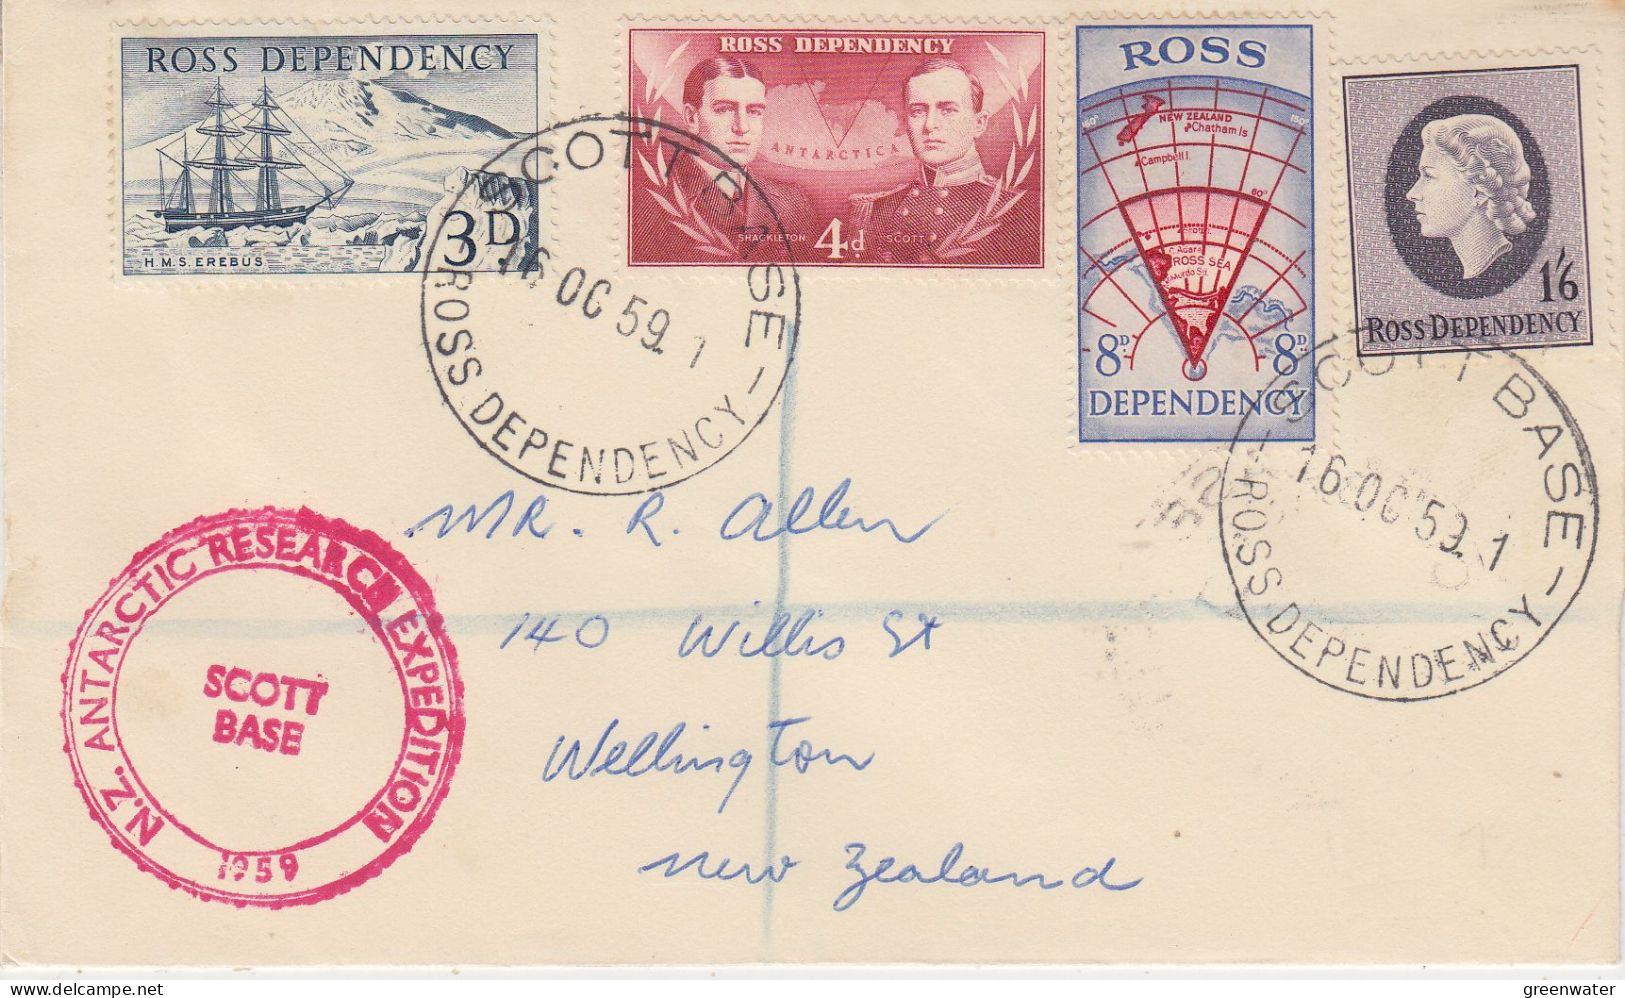 Ross Dependency 1959 NZ Antarctic Research Expedition Registered Cover  Ca Scott Base 16 OCT 1959 (SO235) - Covers & Documents